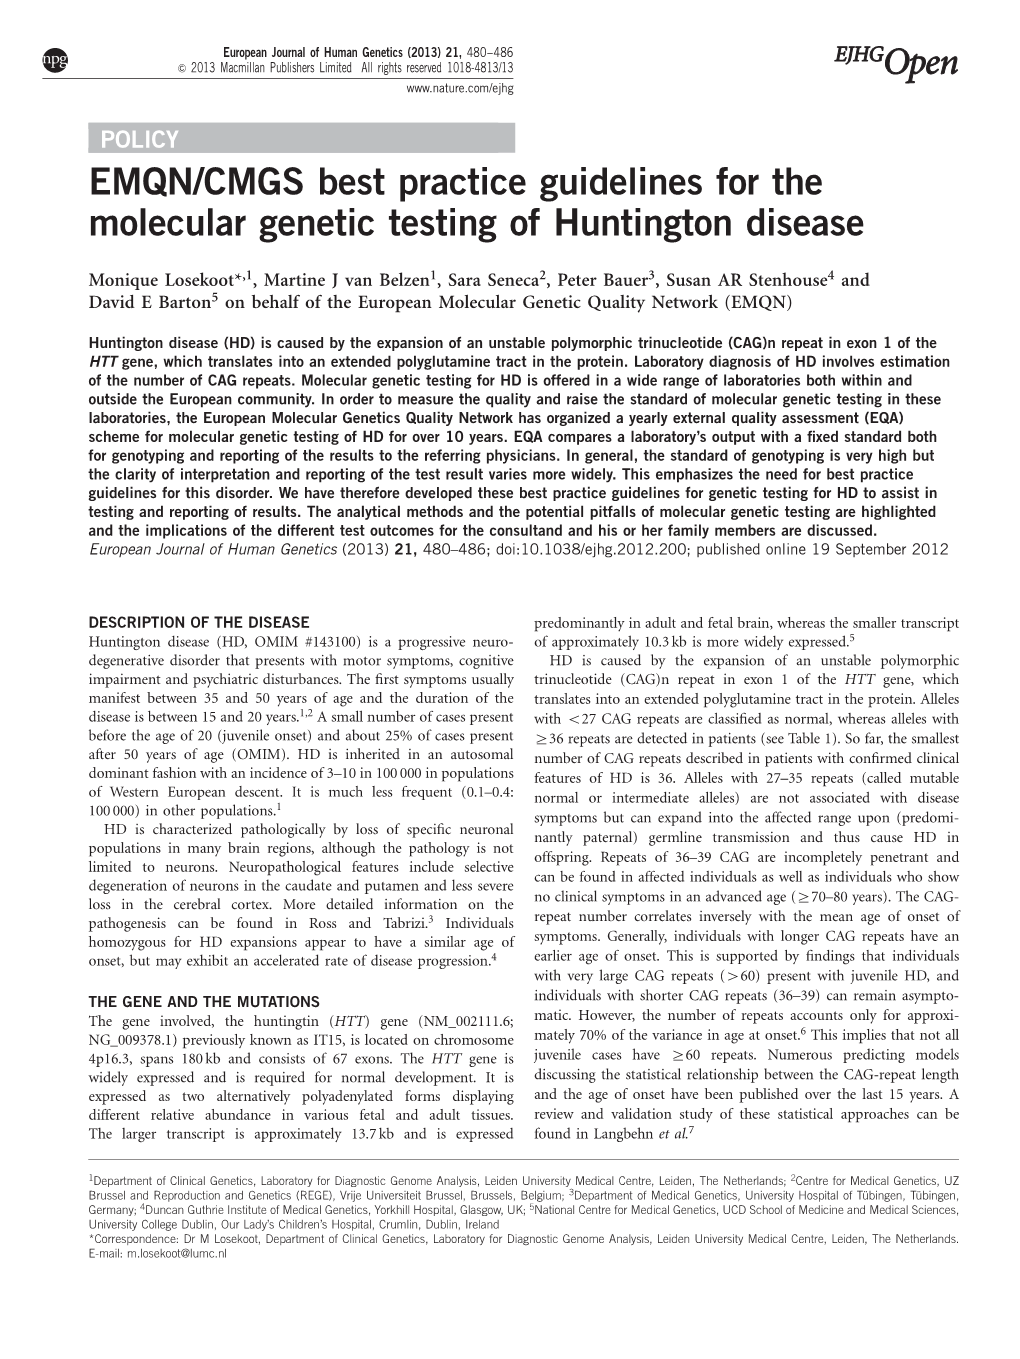 CMGS Best Practice Guidelines for the Molecular Genetic Testing of Huntington Disease